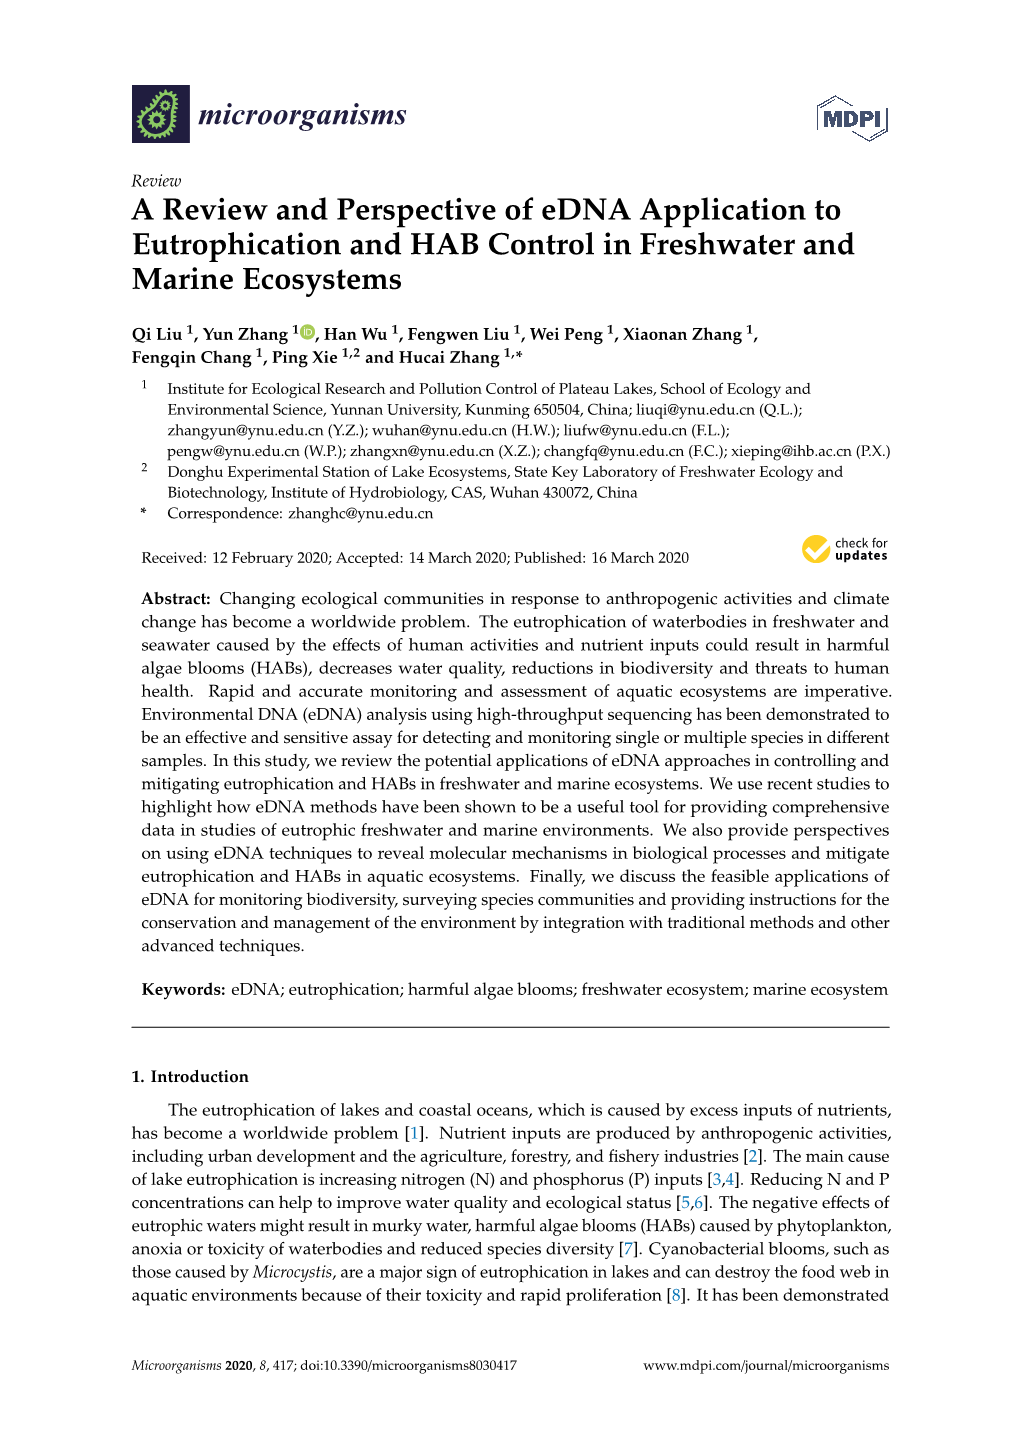 A Review and Perspective of Edna Application to Eutrophication and HAB Control in Freshwater and Marine Ecosystems